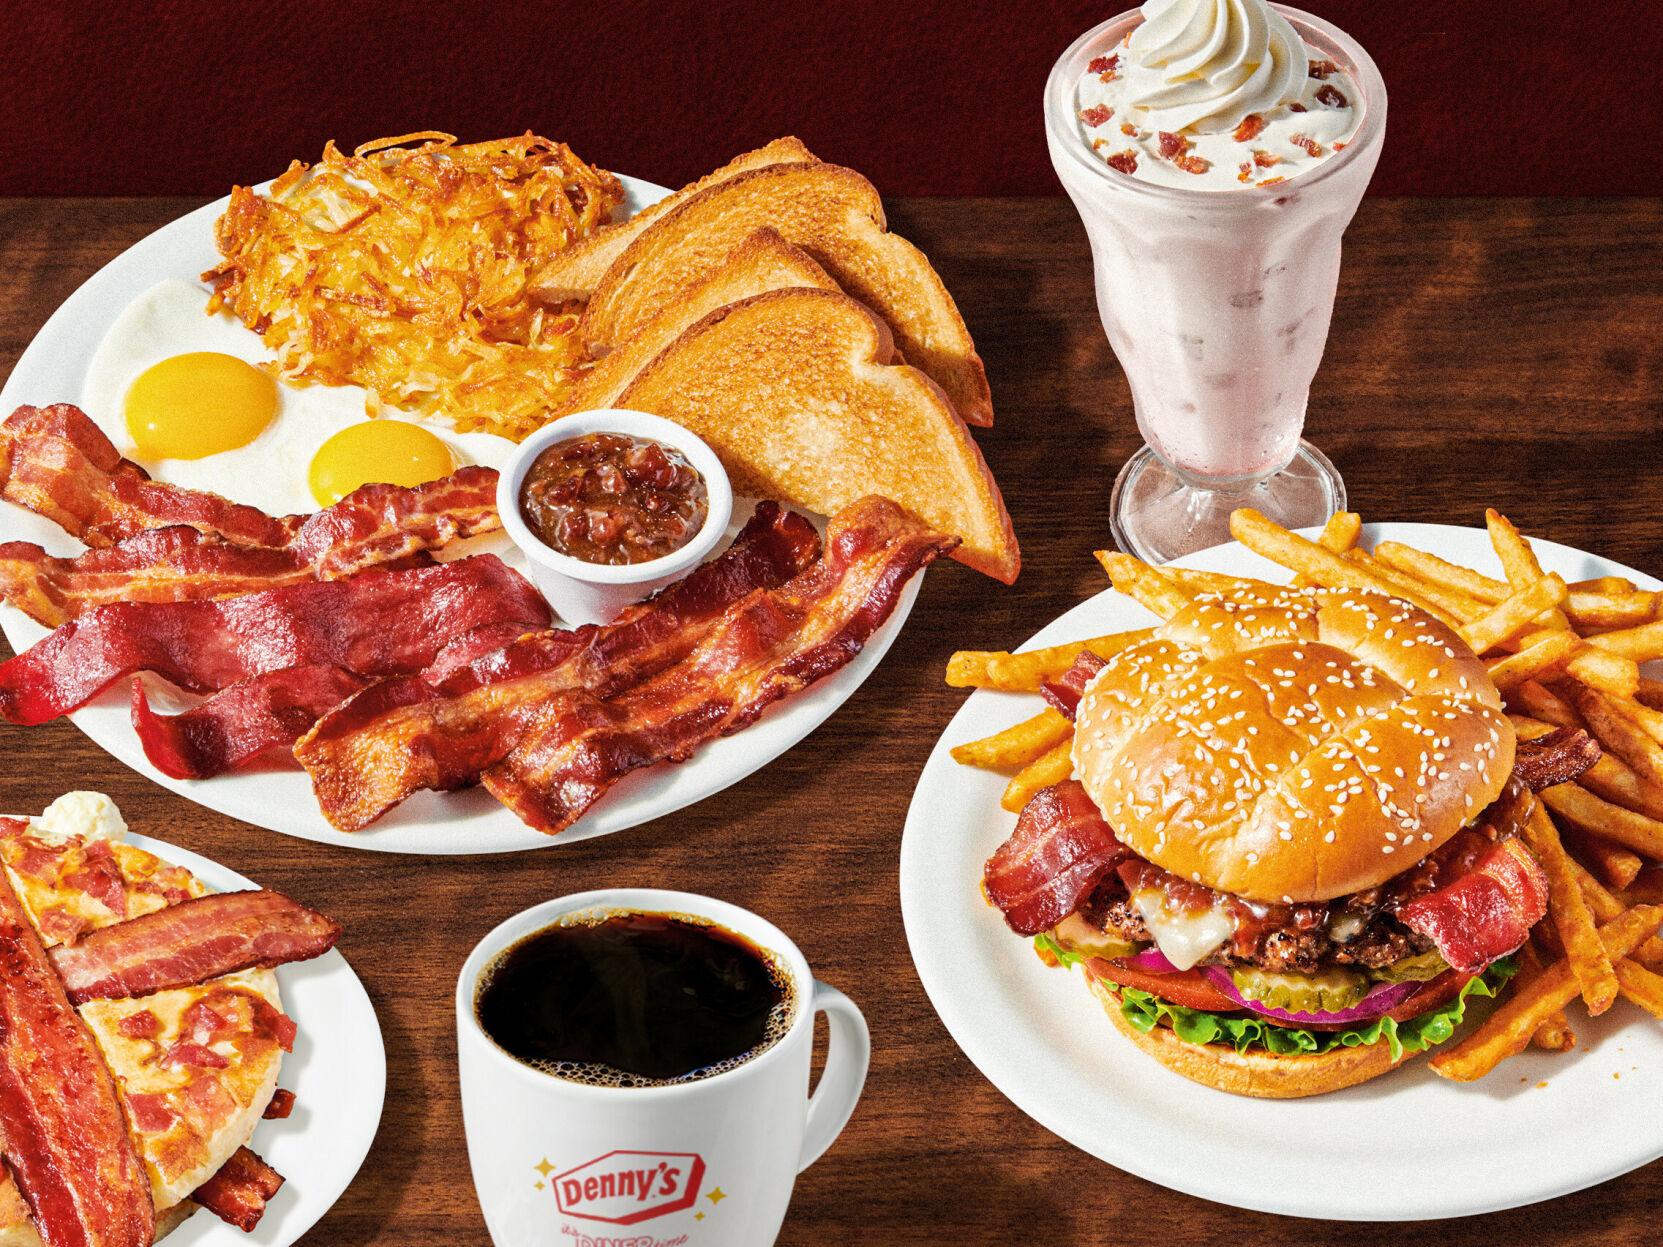 Denny's Doubles Down on its 'America's Diner' Message